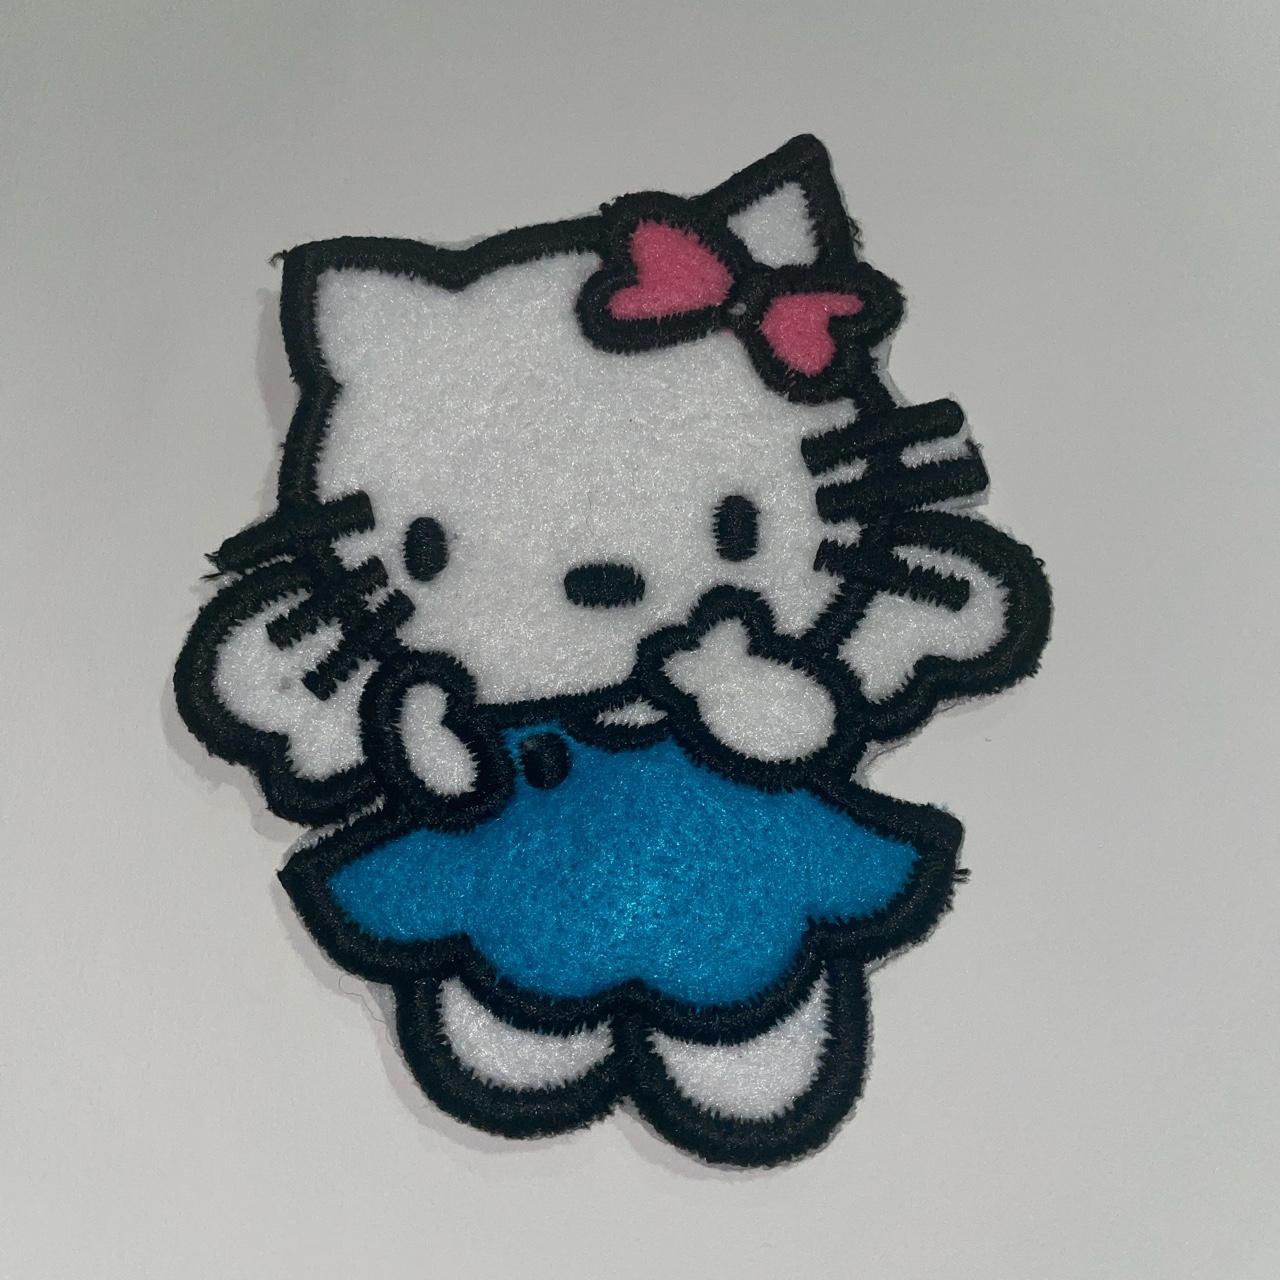 My aunt made me a bunch of hello kitty patches to - Depop